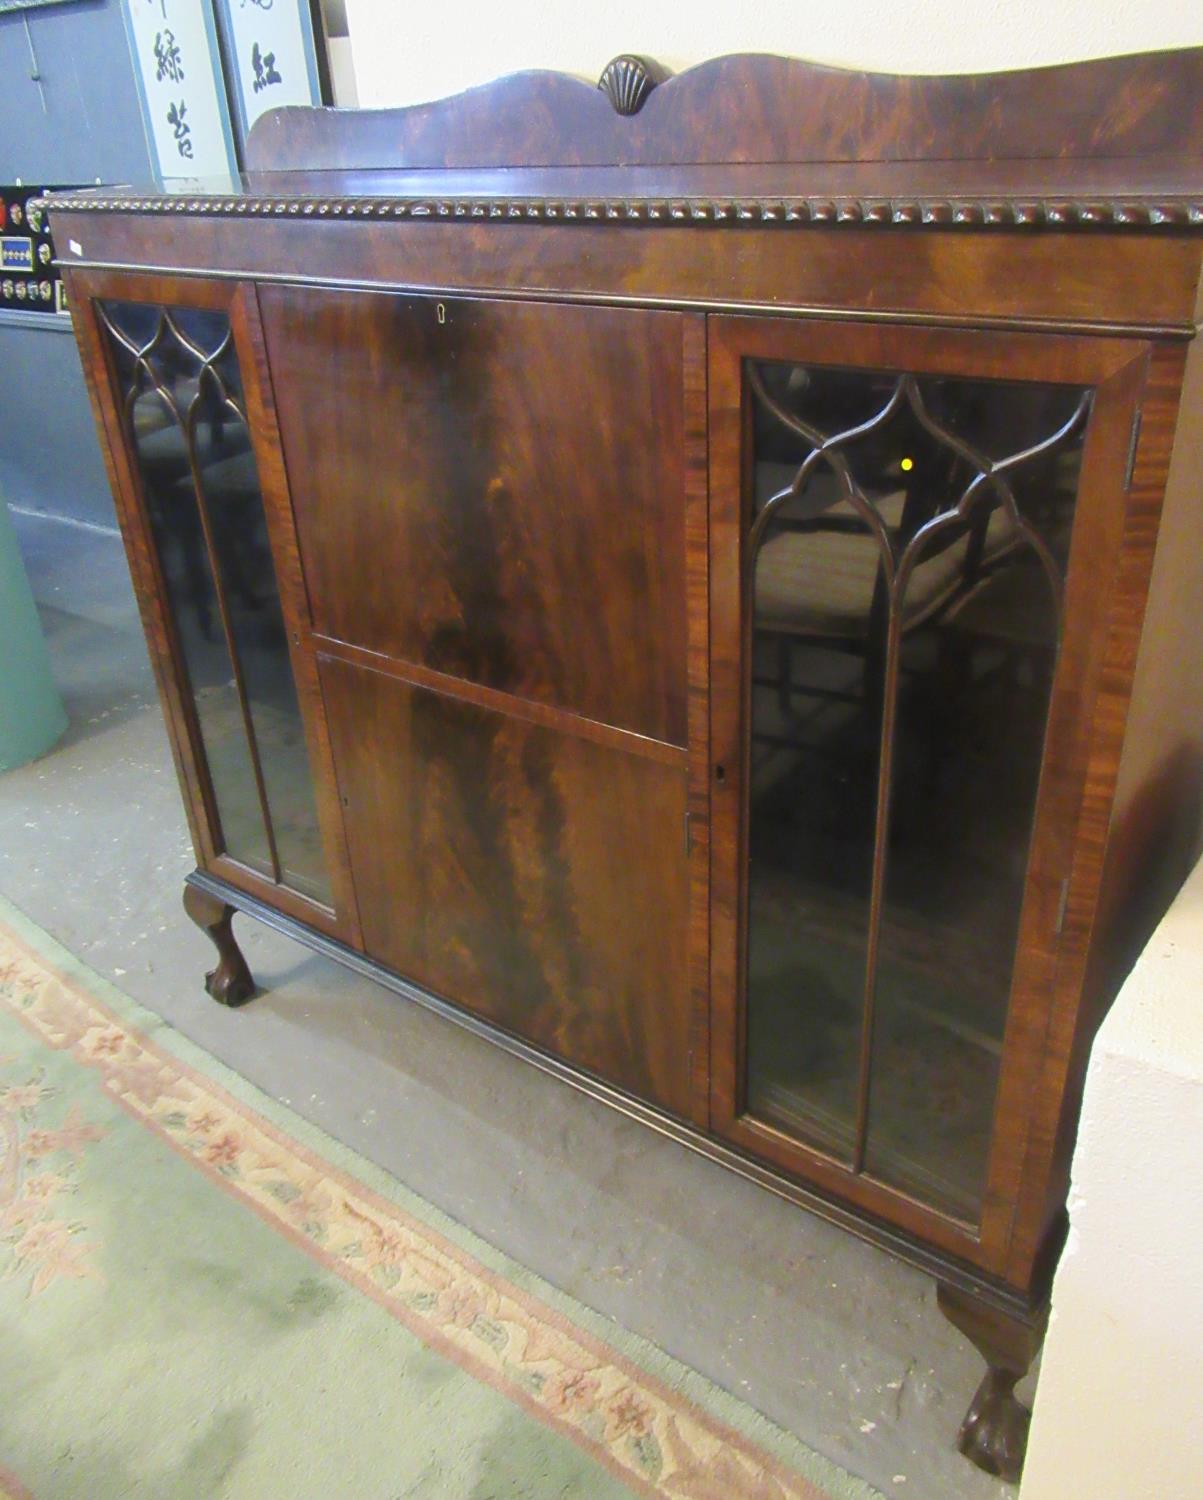 Early 20th Century mahogany secretaire bookcase or display cabinet on cabriole legs and ball and